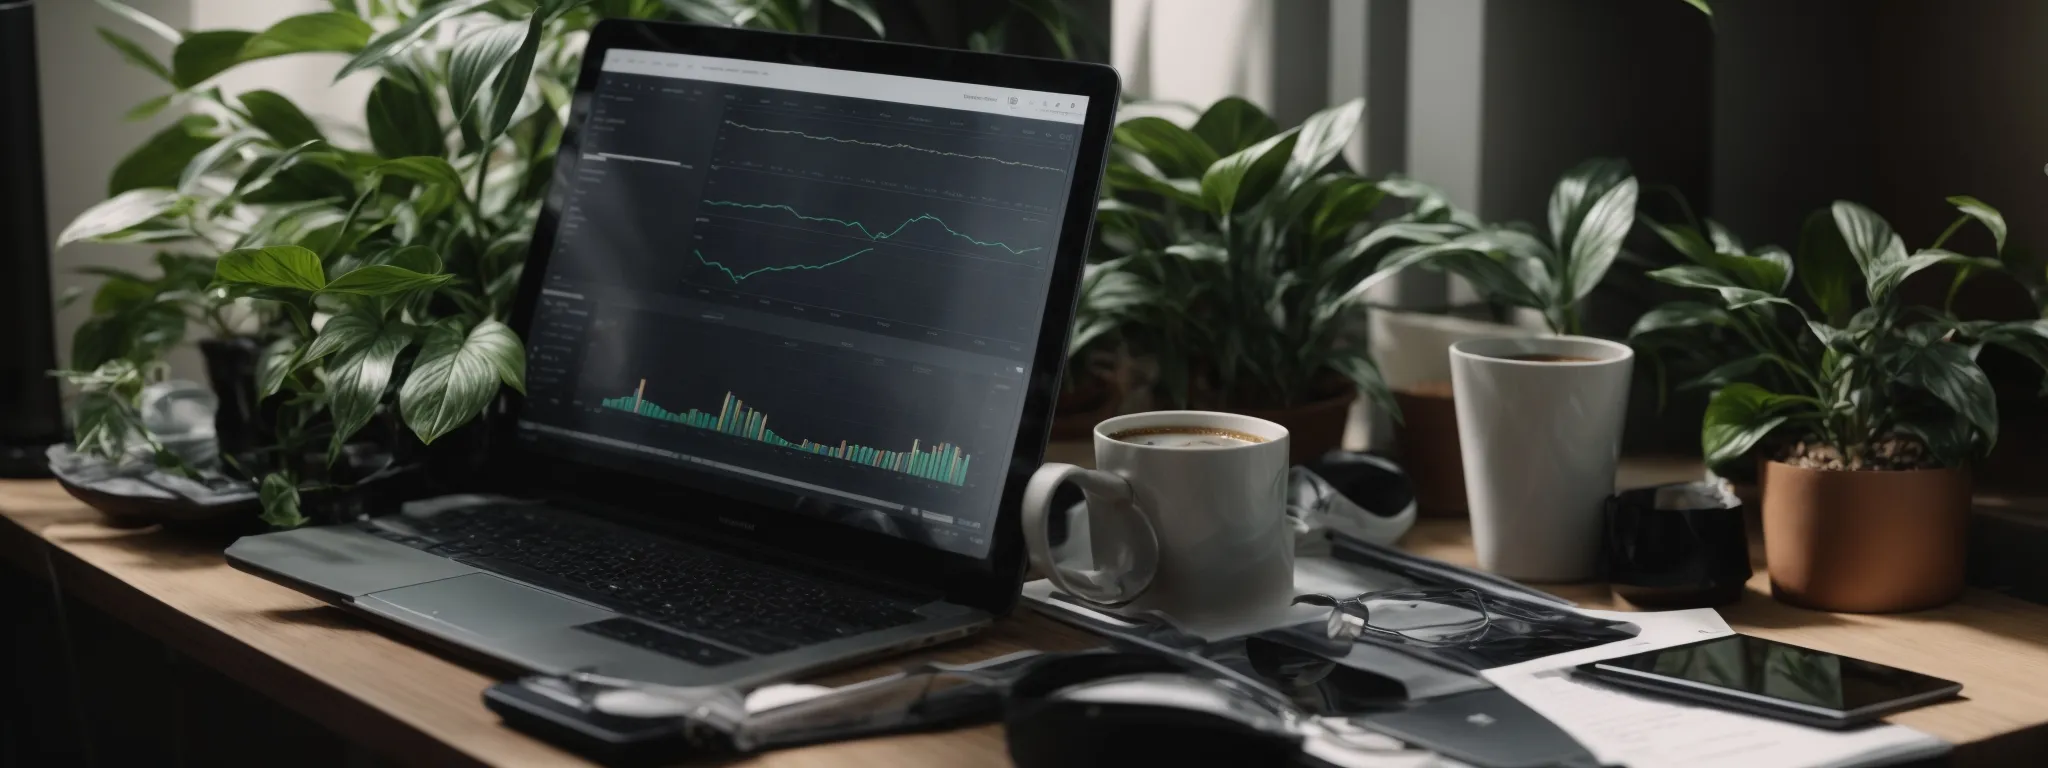 a desktop with a notebook, a coffee cup, and a digital tablet displaying data charts, situated next to a potted plant.